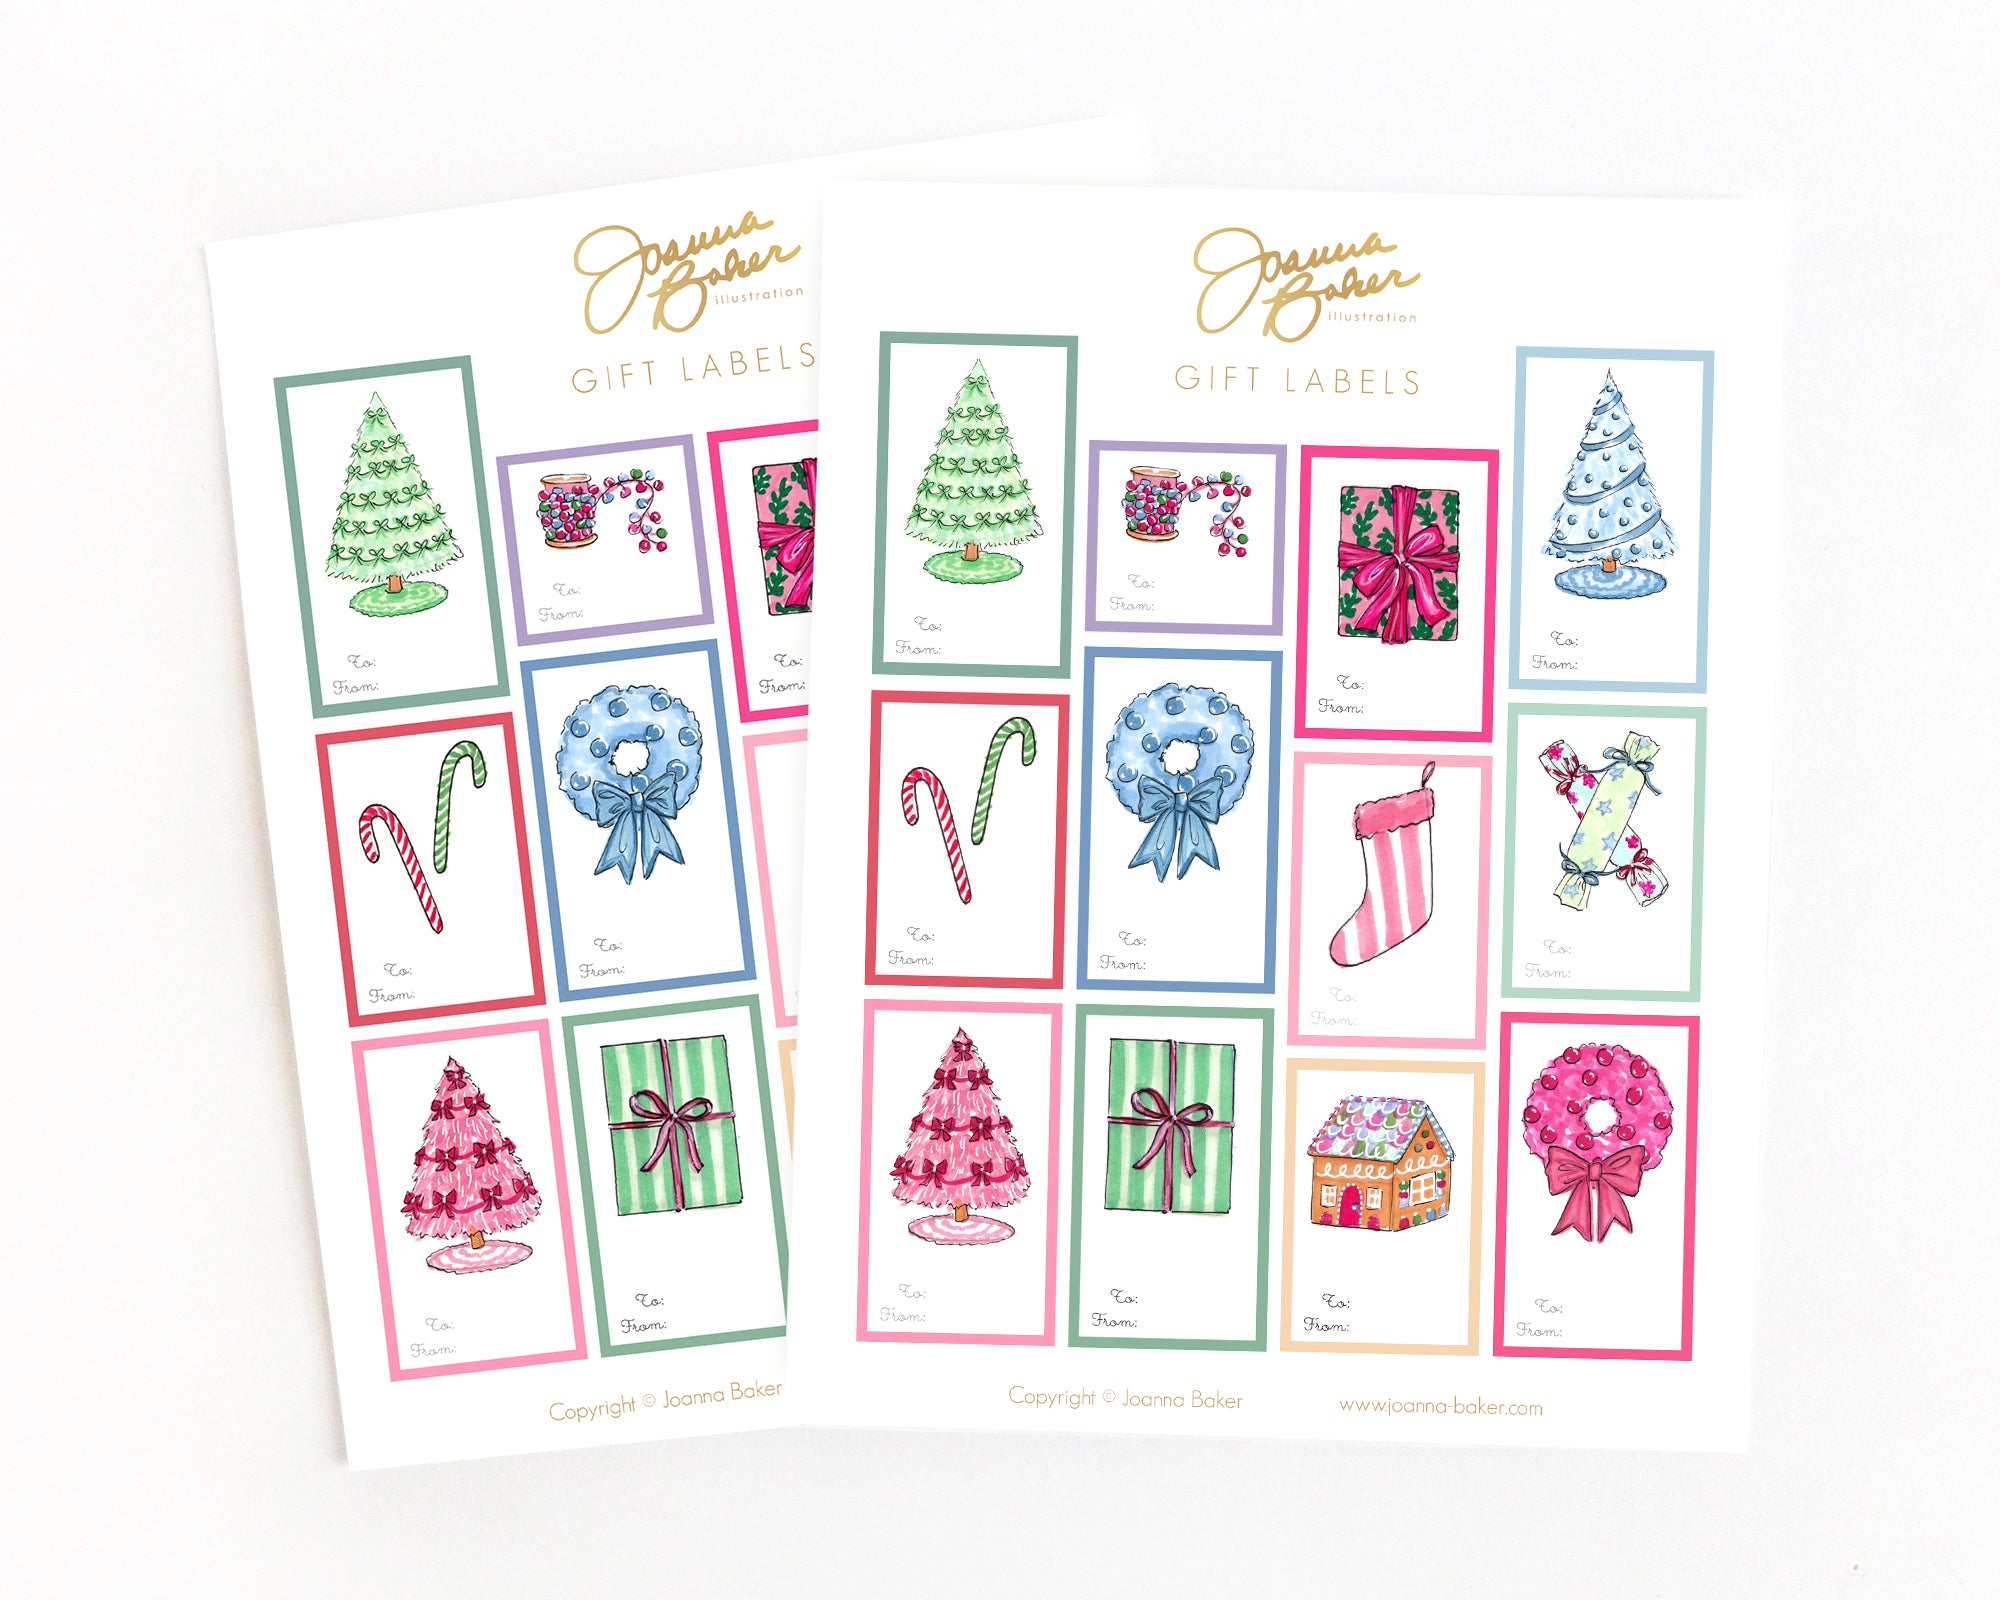 South Park Holiday Gift Label Sticker Sheet – Paramount Shop